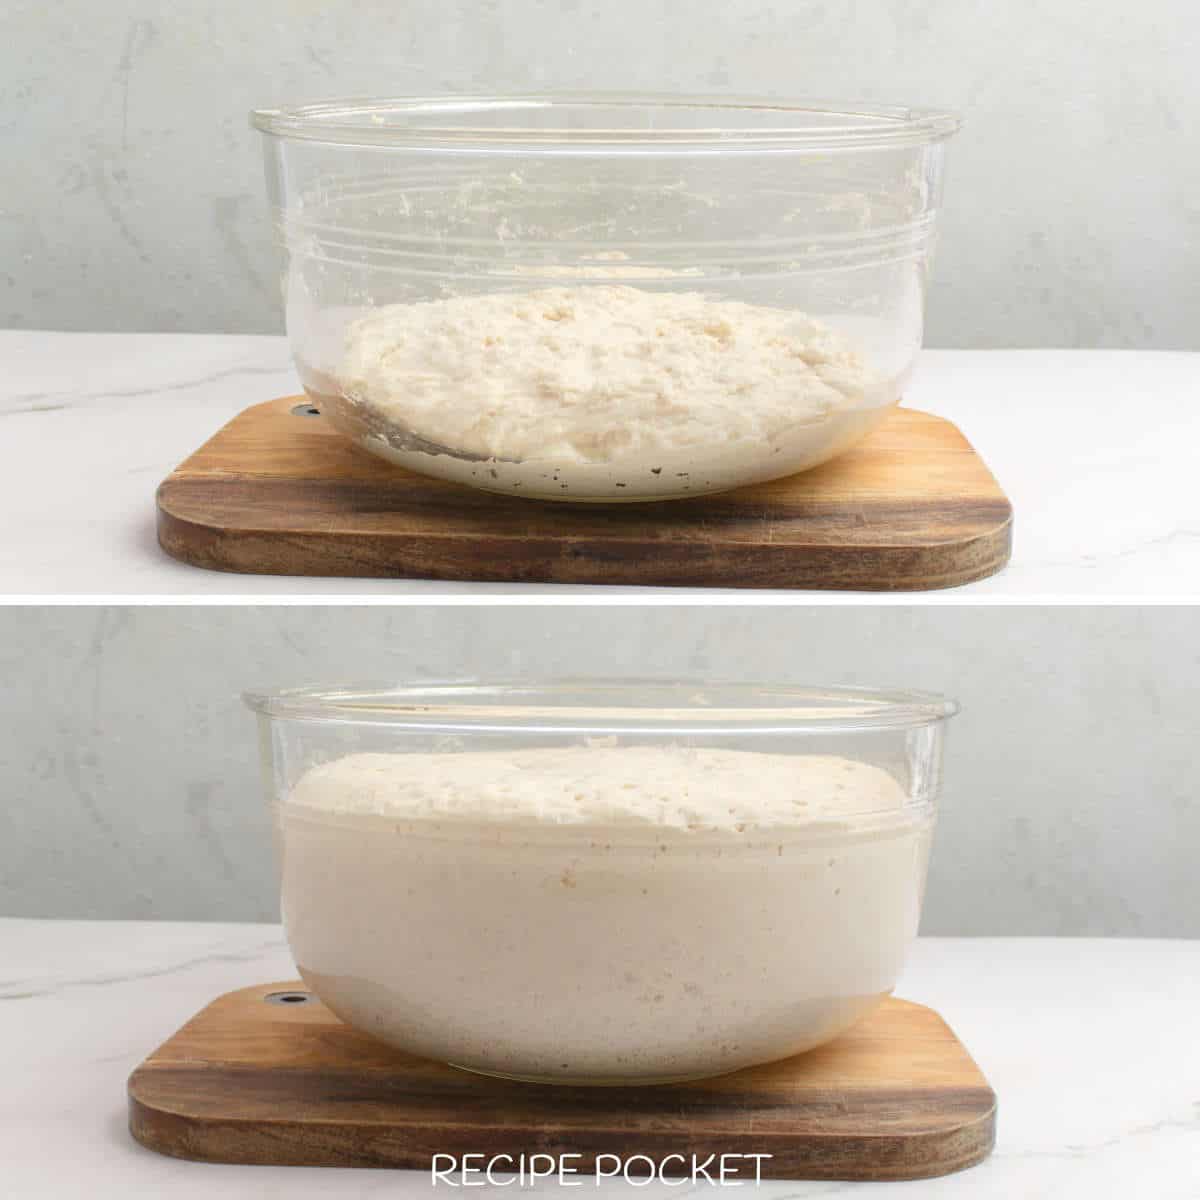 Image showing bread dough doubled in size.